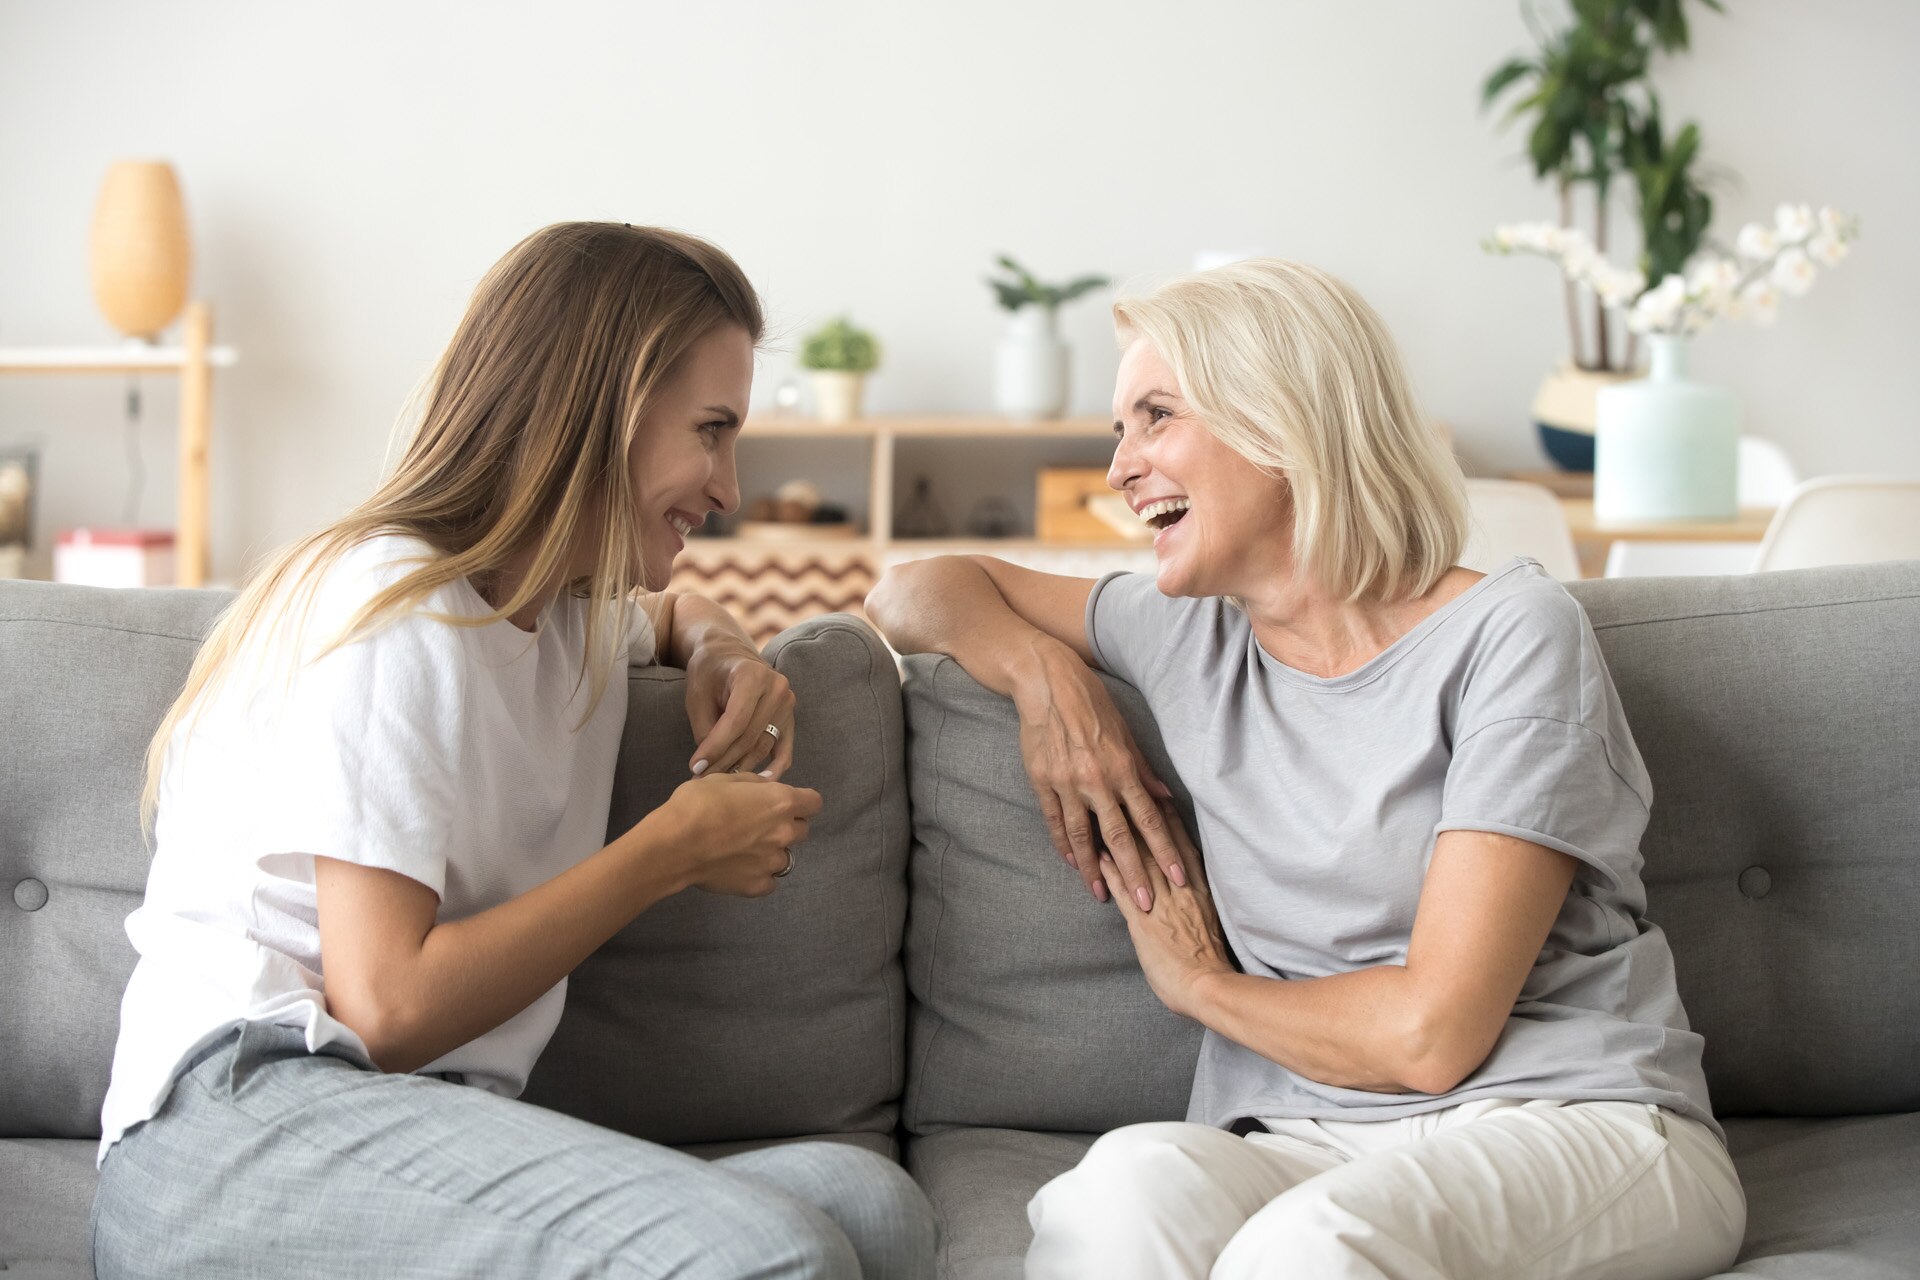 Cheerful old mother and young adult woman talking laughing together, smiling elderly older mum having fun chatting with grown daughter, two age generations pleasant conversation at home concept; Shutterstock ID 1231591396; purchase_order: -; job: -; client: -; other: -